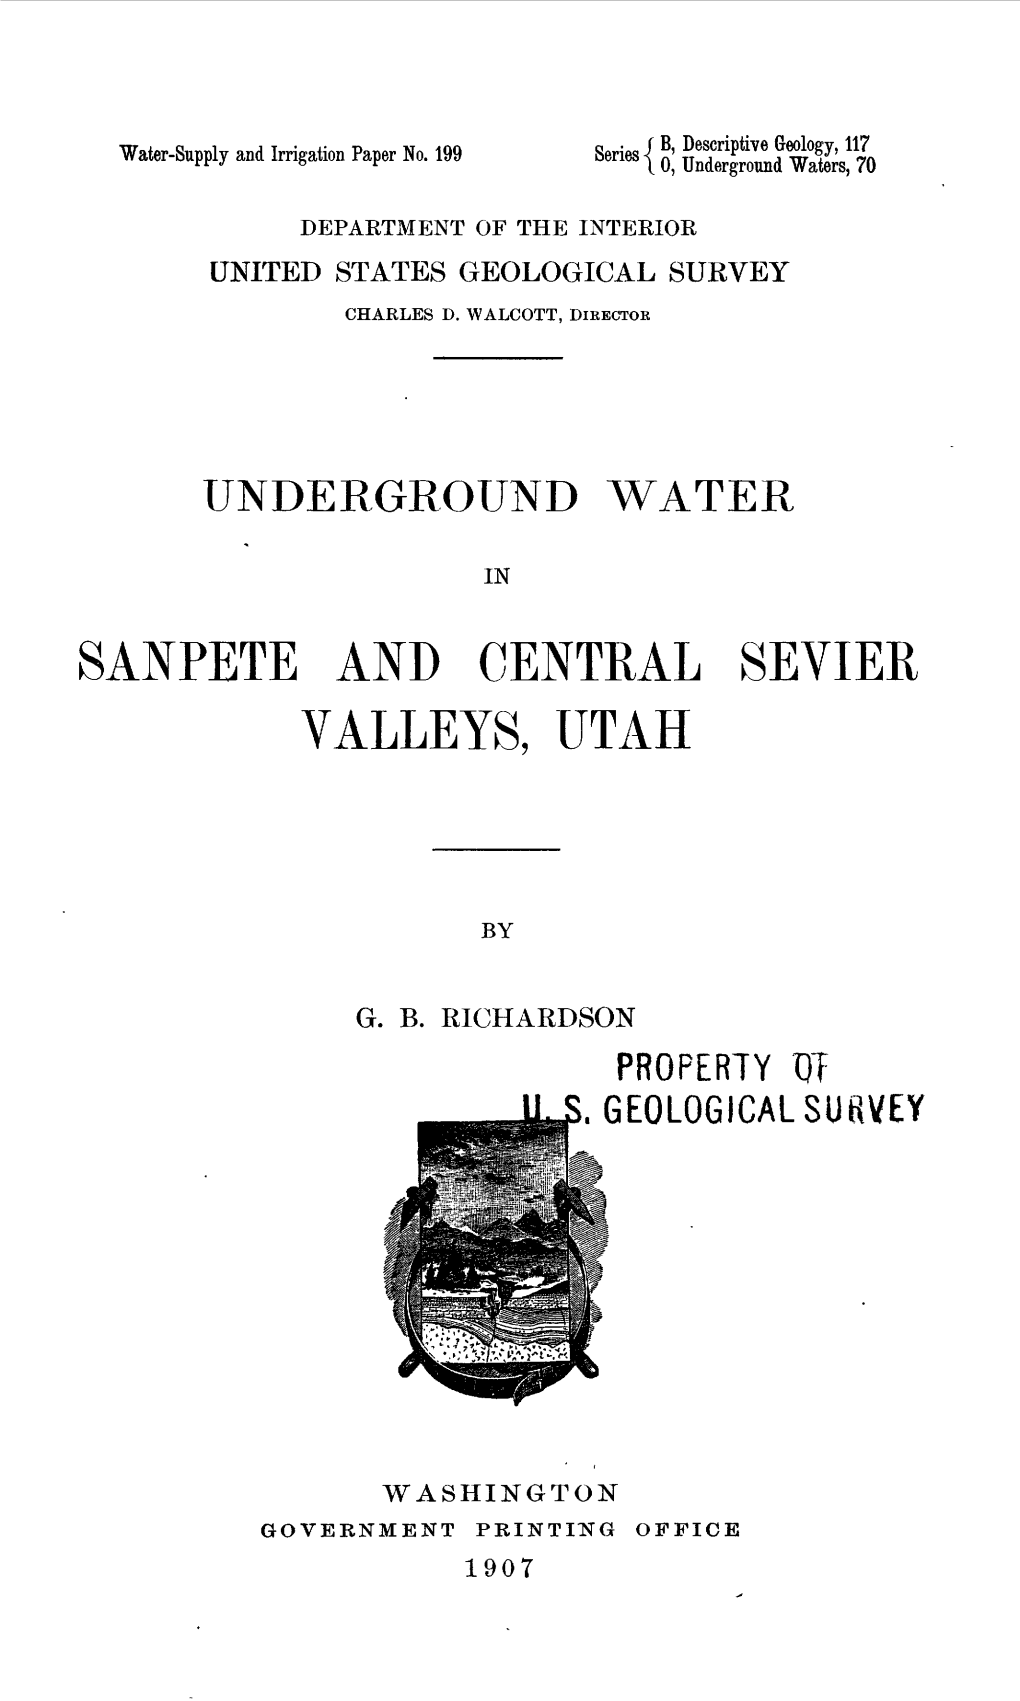 Underground Water in Sanpete and Central Sevier Valleys, Utah, by G